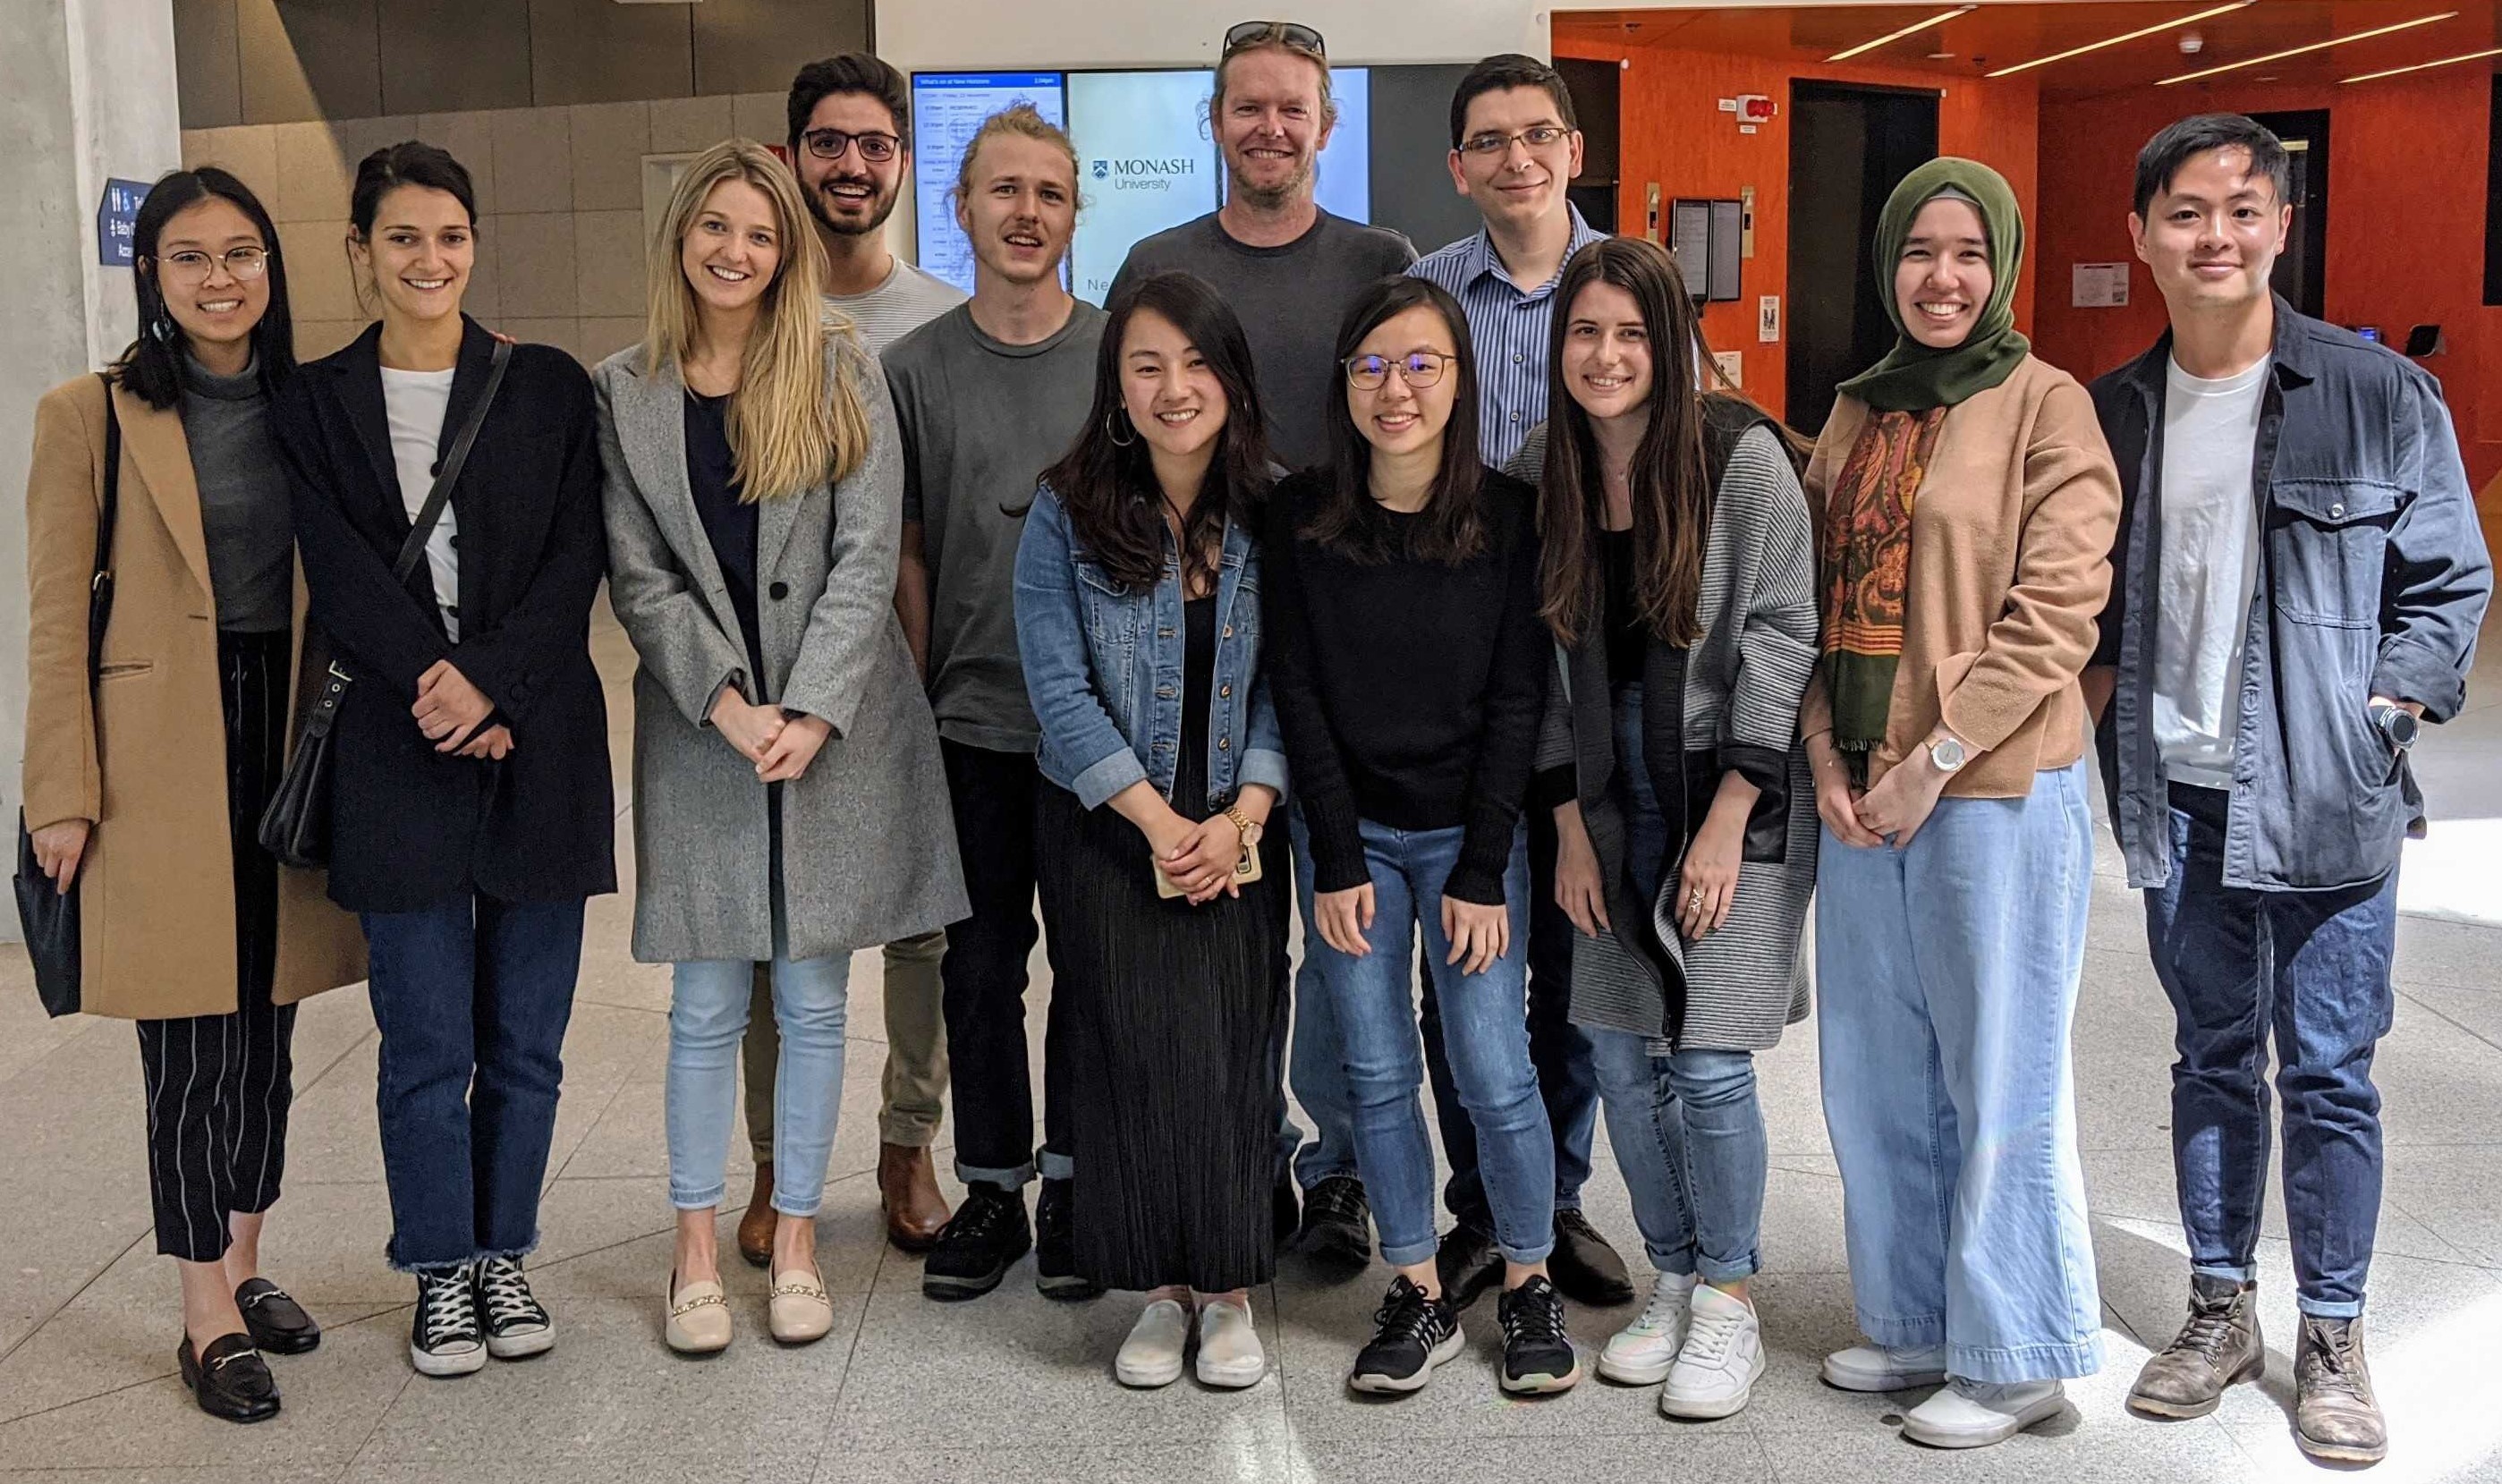 A group photo of members of the lab from the year 2019